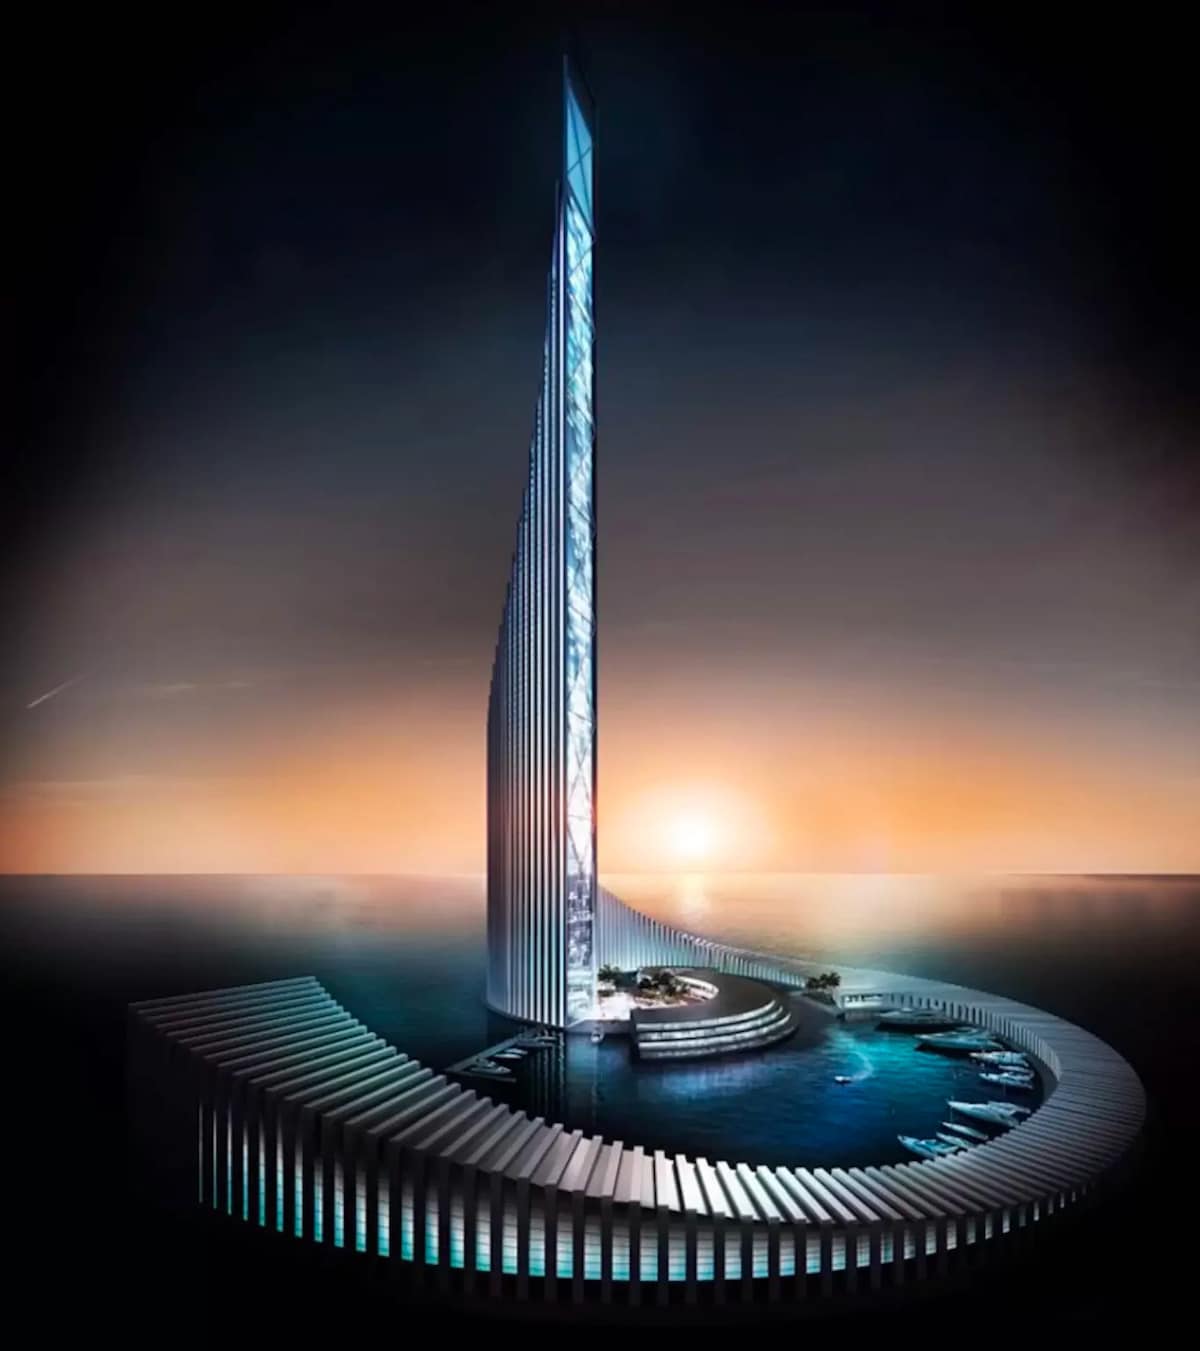 Proposal for the Second Tallest Tower in Africa, Domino Tower, visualized by xCassia